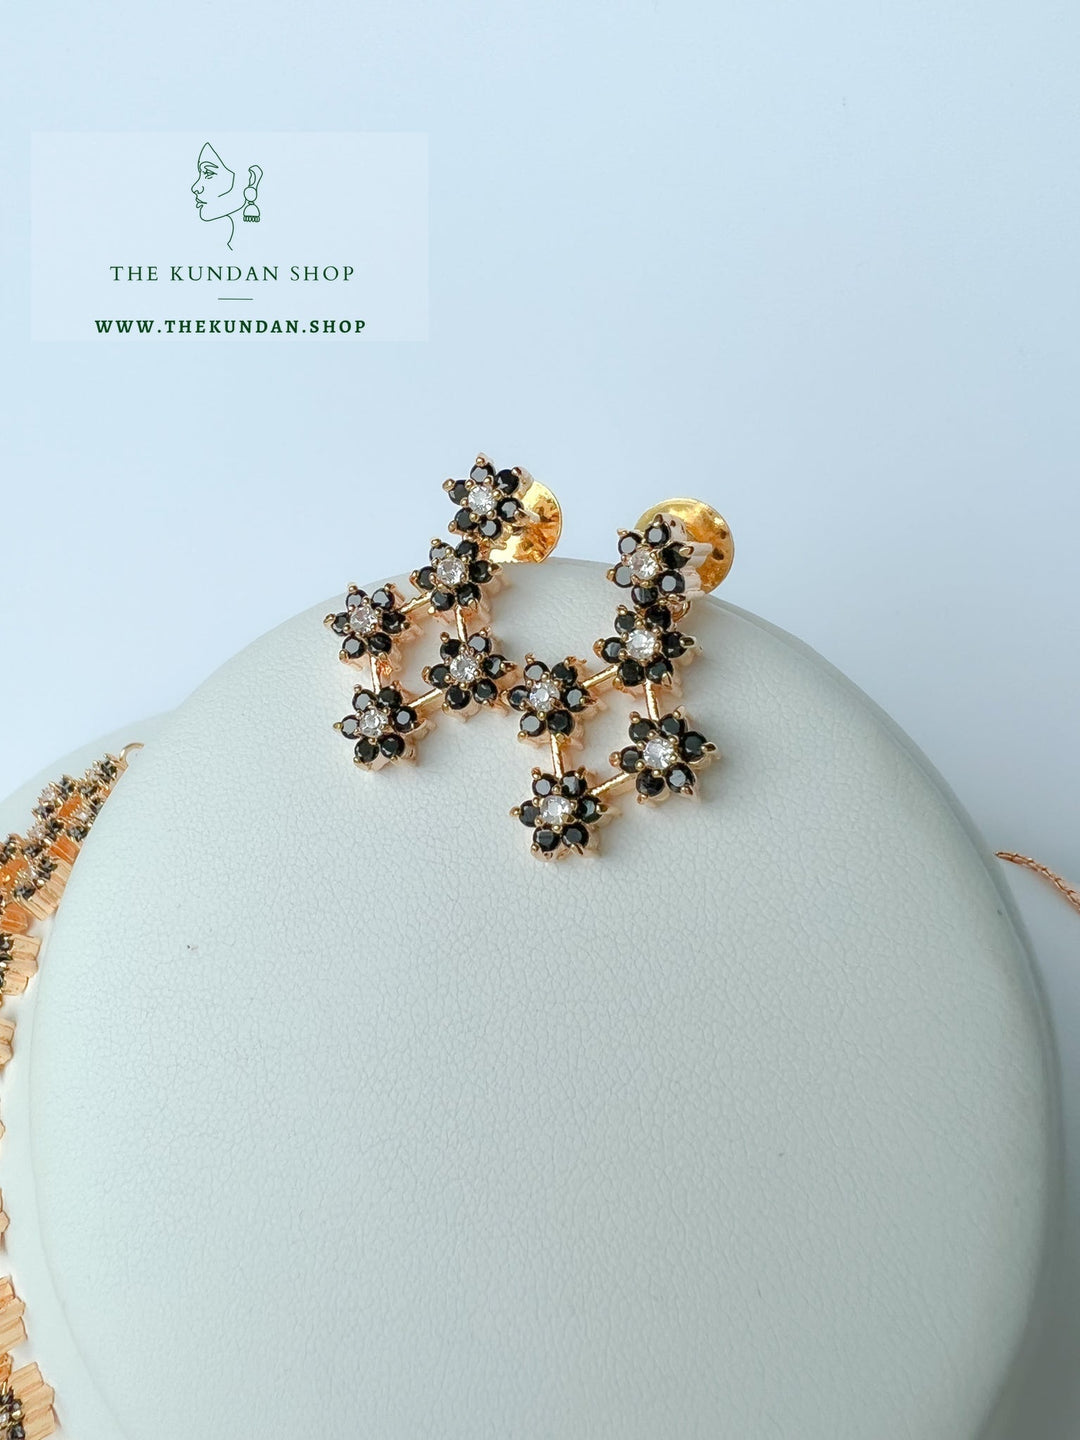 Consequential in Black Necklace Sets THE KUNDAN SHOP 